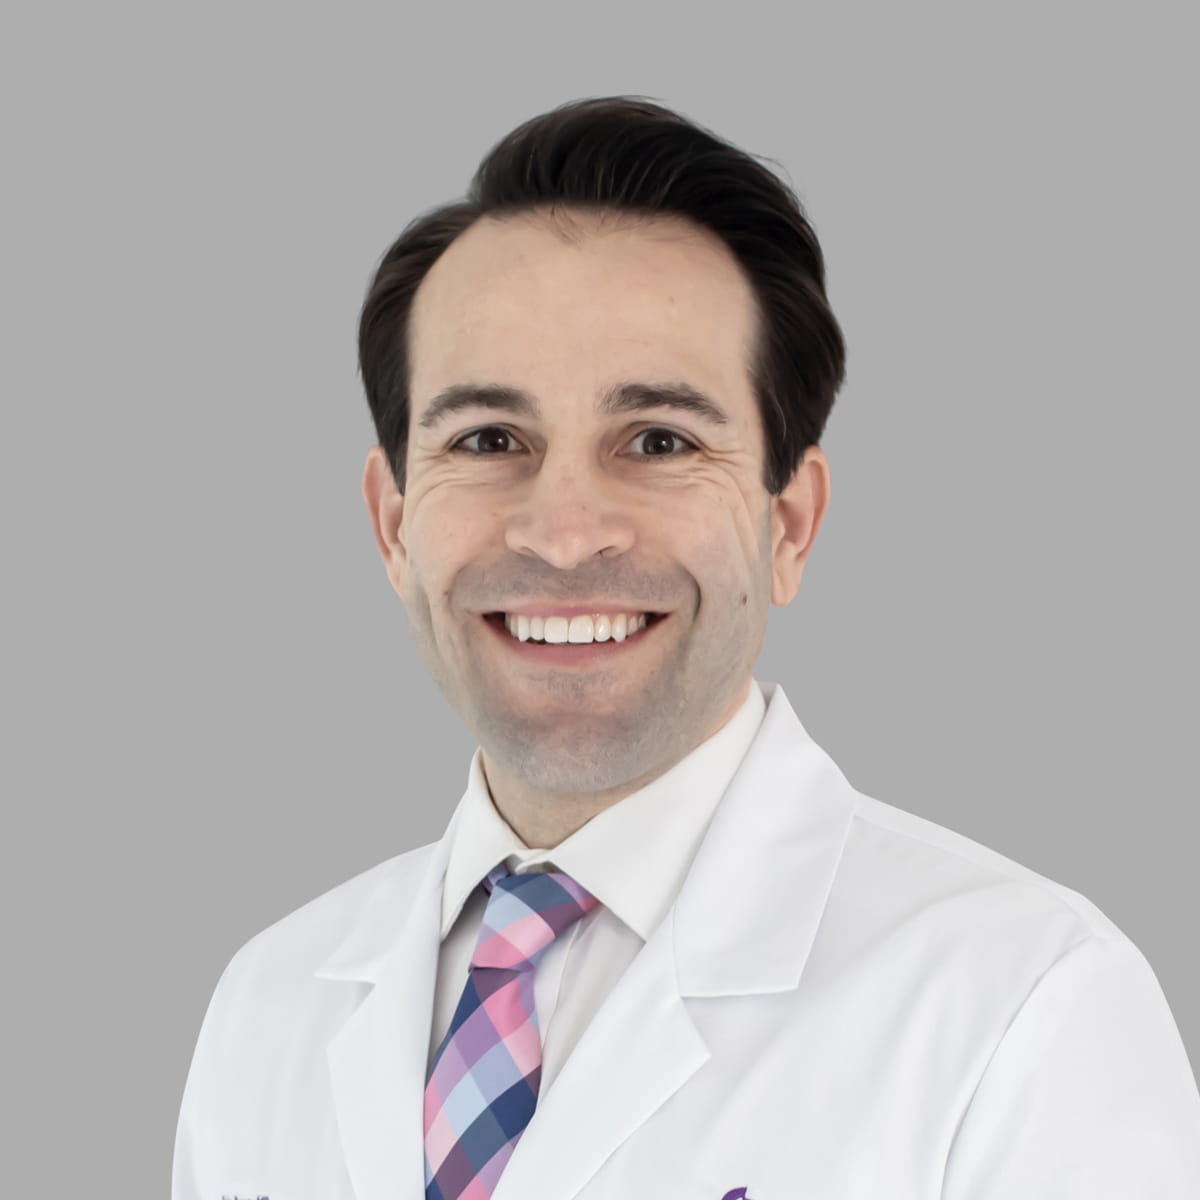 A friendly image of Eric Berg MD